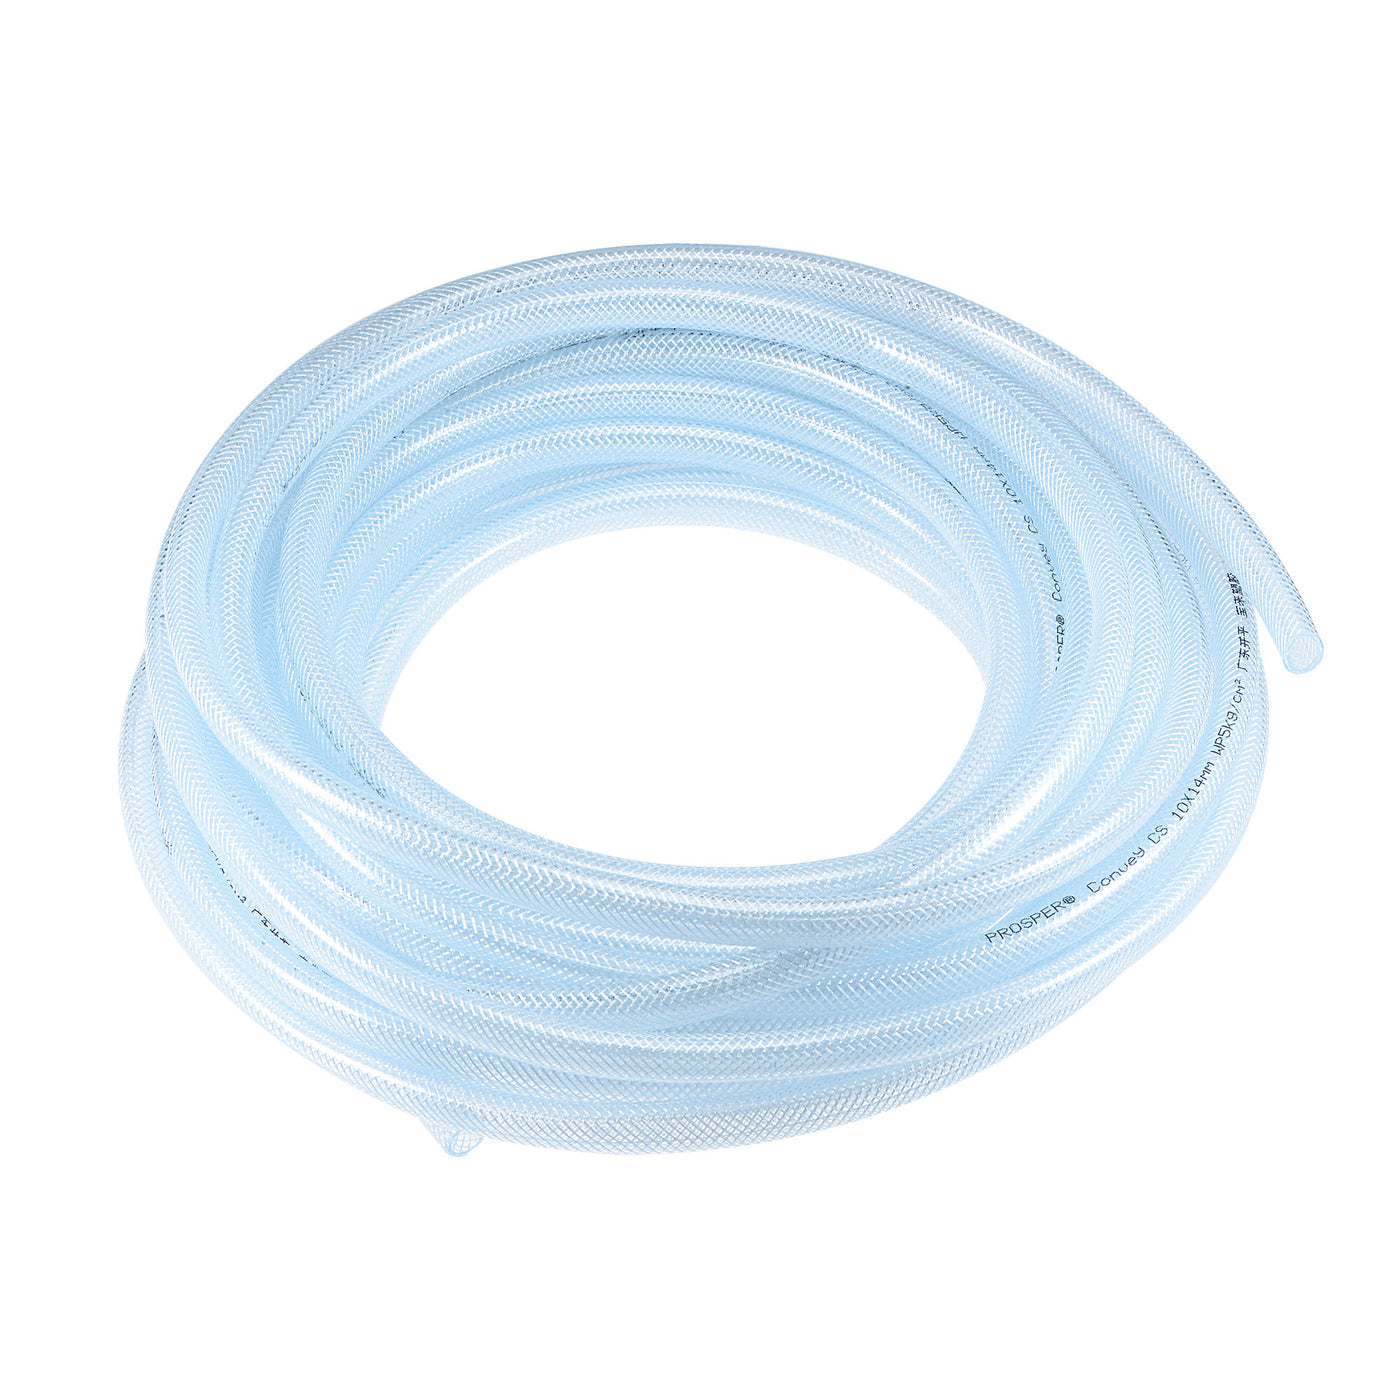 Uxcell Uxcell Braided PVC Tubing, 5/16"(8mm) ID 1/2"(12mm) OD 49ft(15m) Flexible Clear Water Hose